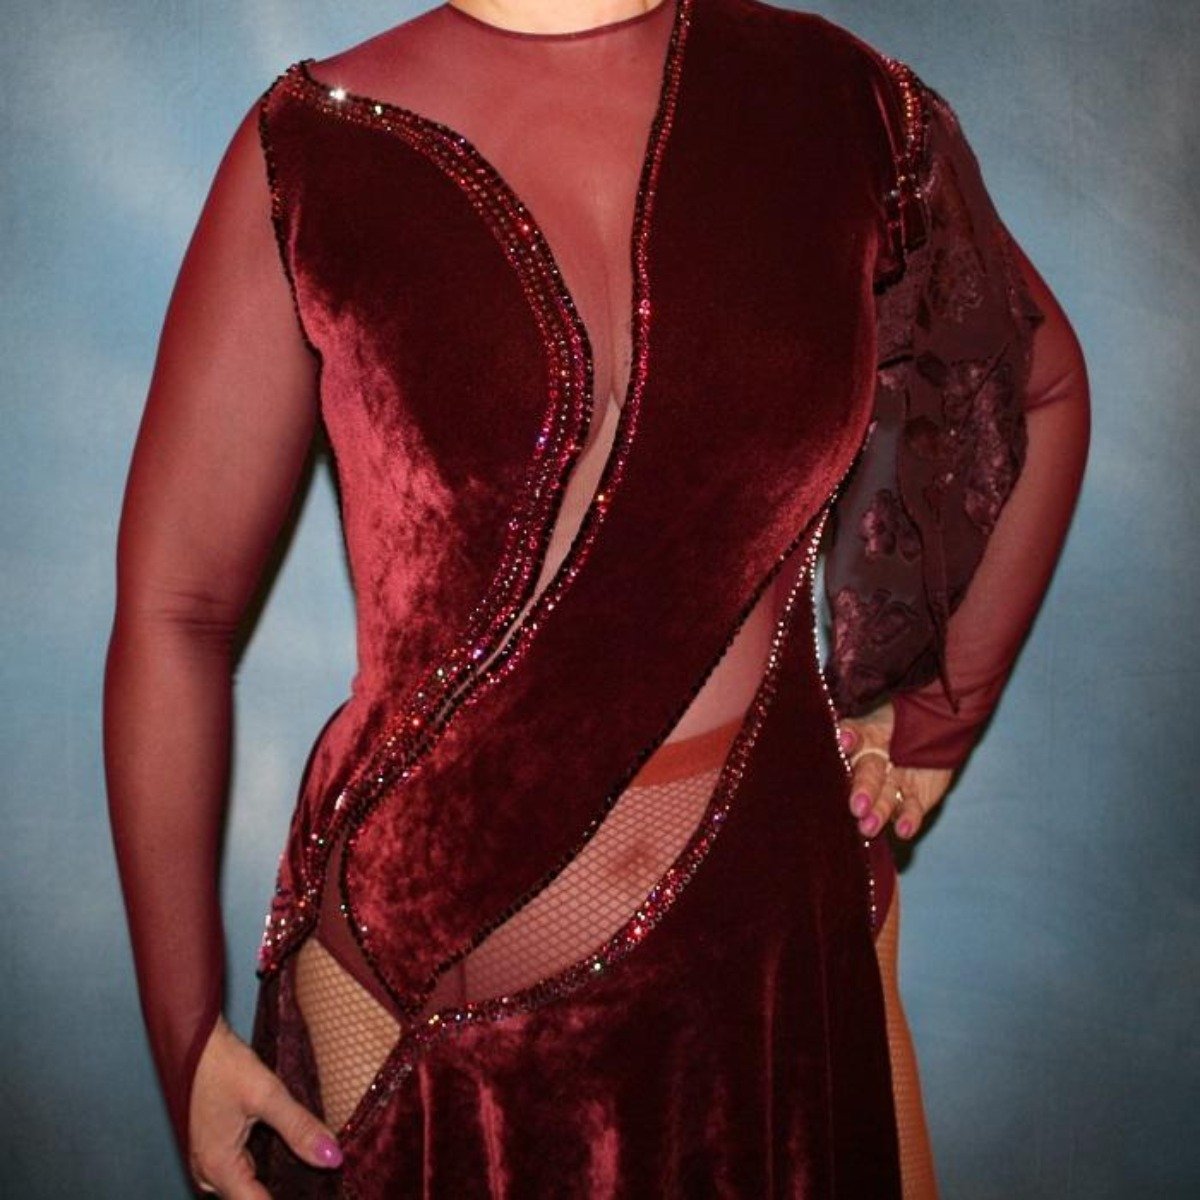 Crystal's Creations close up view of Burgundy stretch velvet Latin/rhythm dress created on burgundy stretch mesh base with rose patterned clip/cut chiffon, is embellished with burgundy, fuchsia, antique rose, & orchid Swarovski rhinestone work & a touch of Swarovski hand beading.